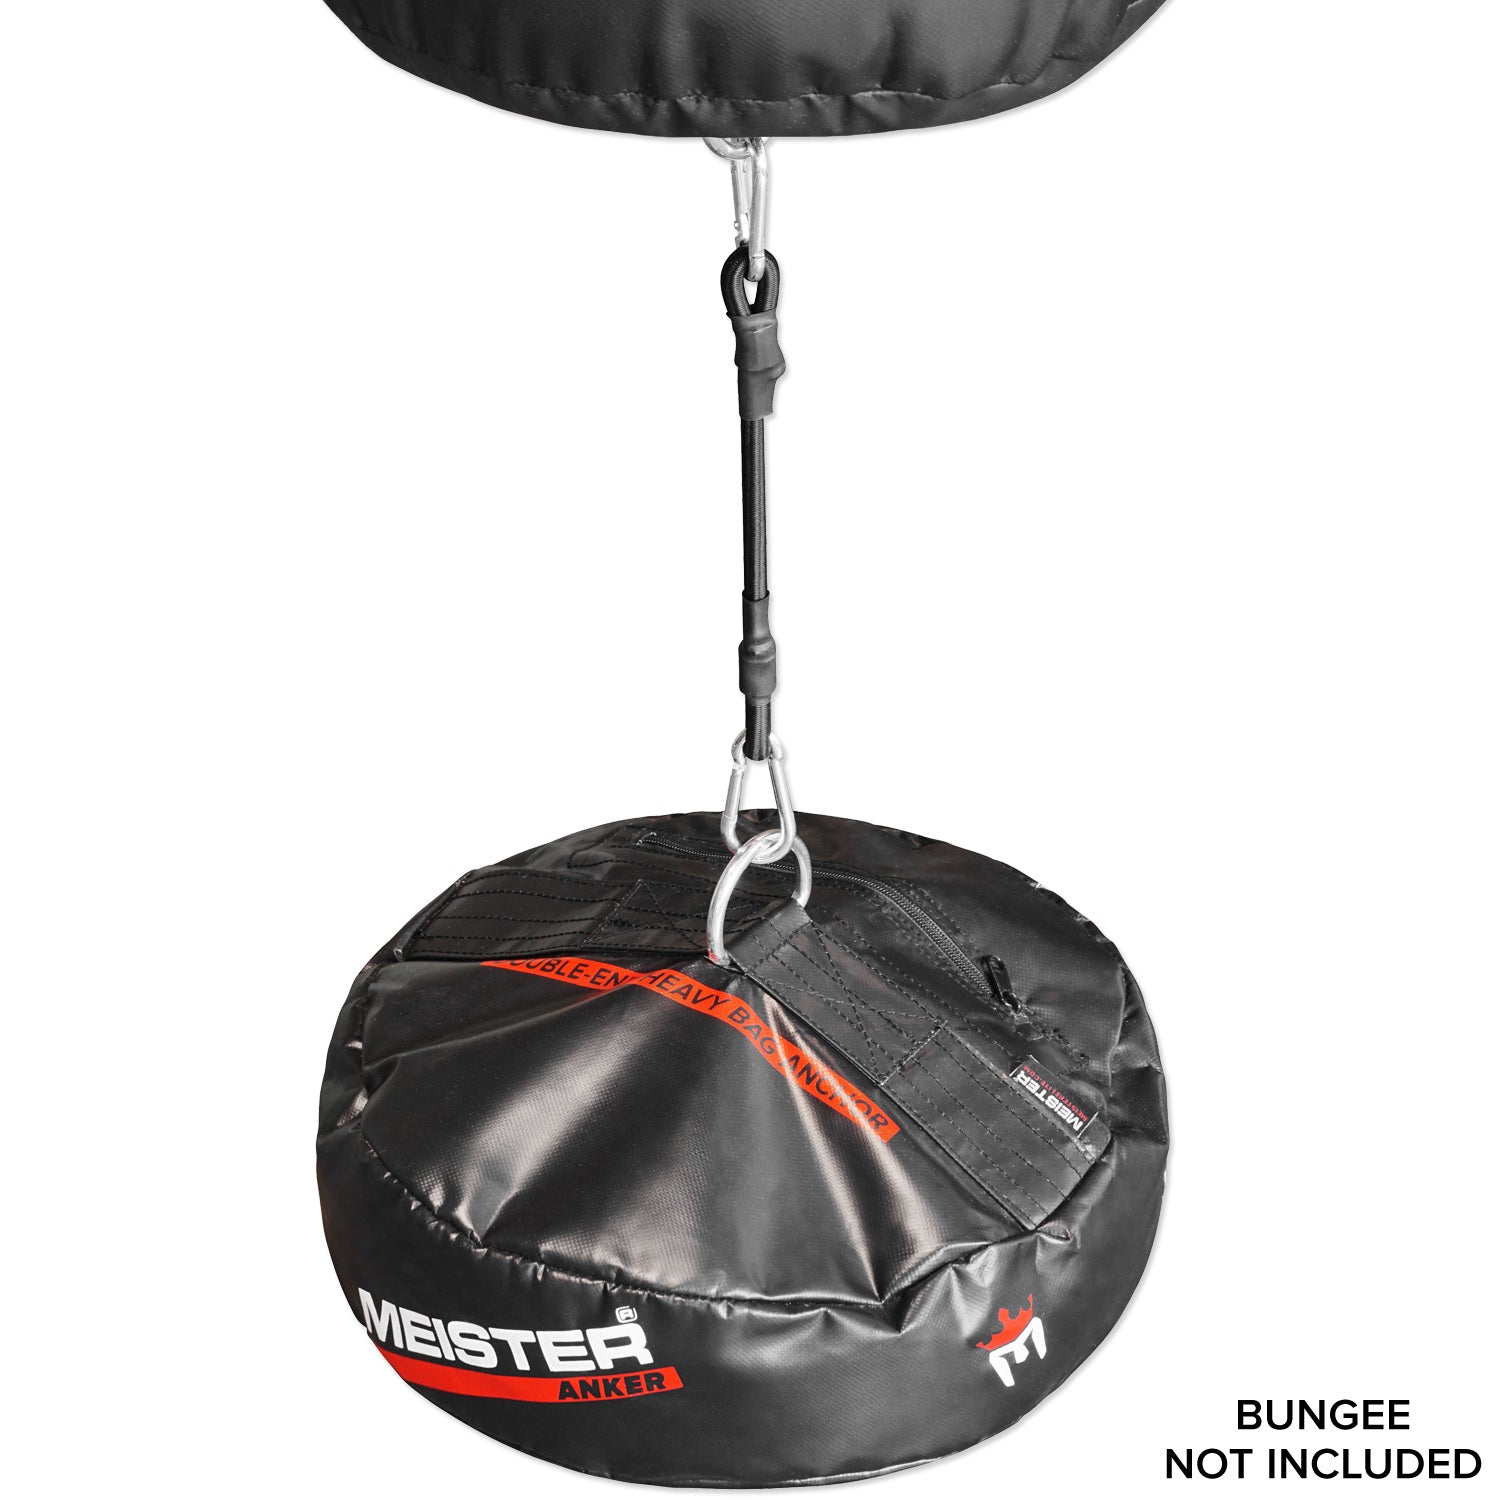 Meister ANKER Double-End Boxing Heavy Bag Floor Anchor